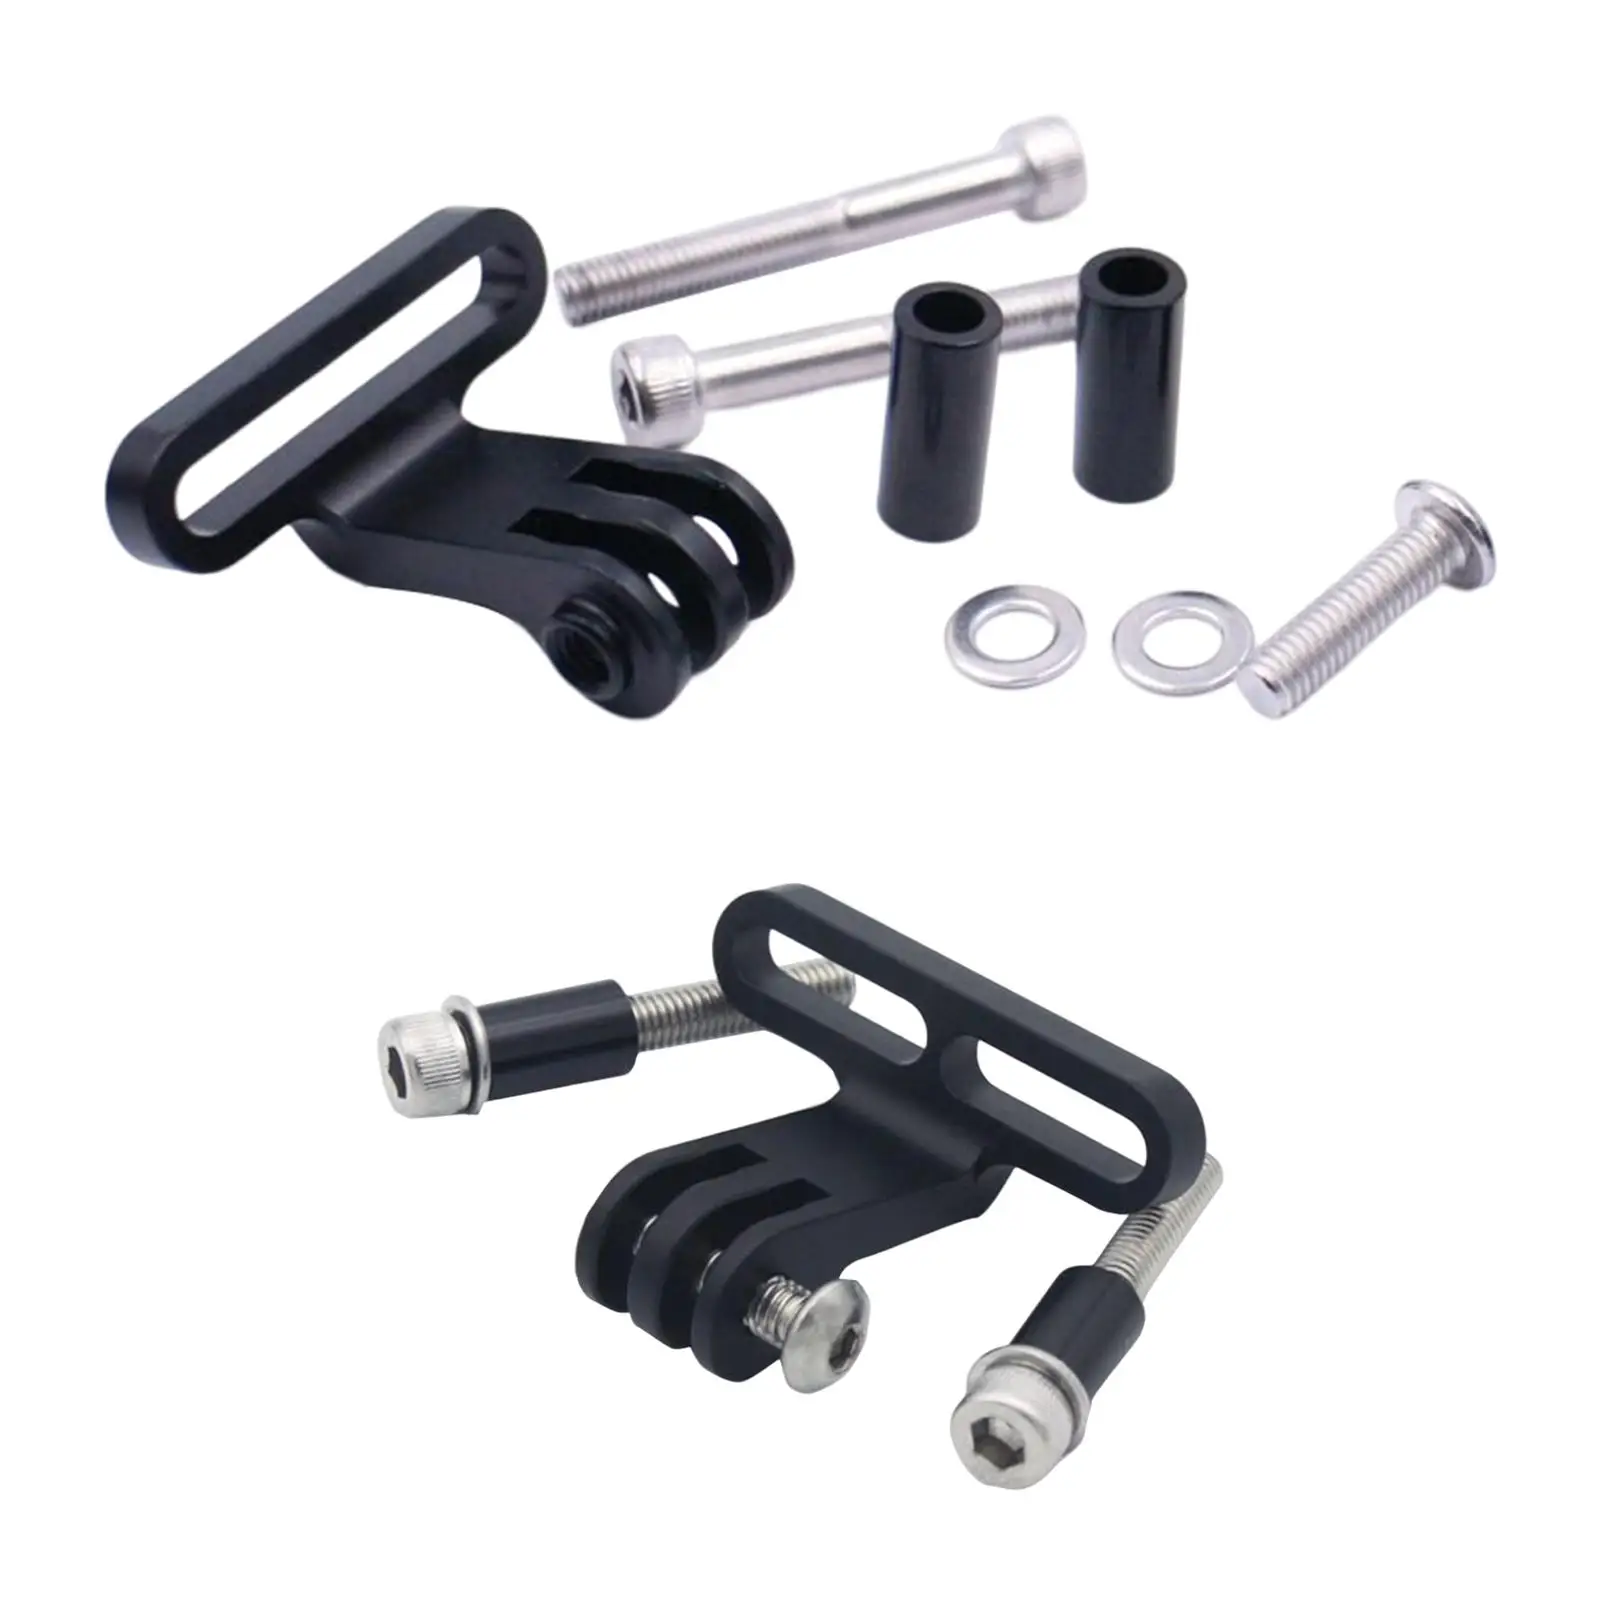 Out Front Mount for Bike Camera Bikes Handlebar Extended Mount Action Camera Holder Cycling Bracket Mounts Aluminium Alloy